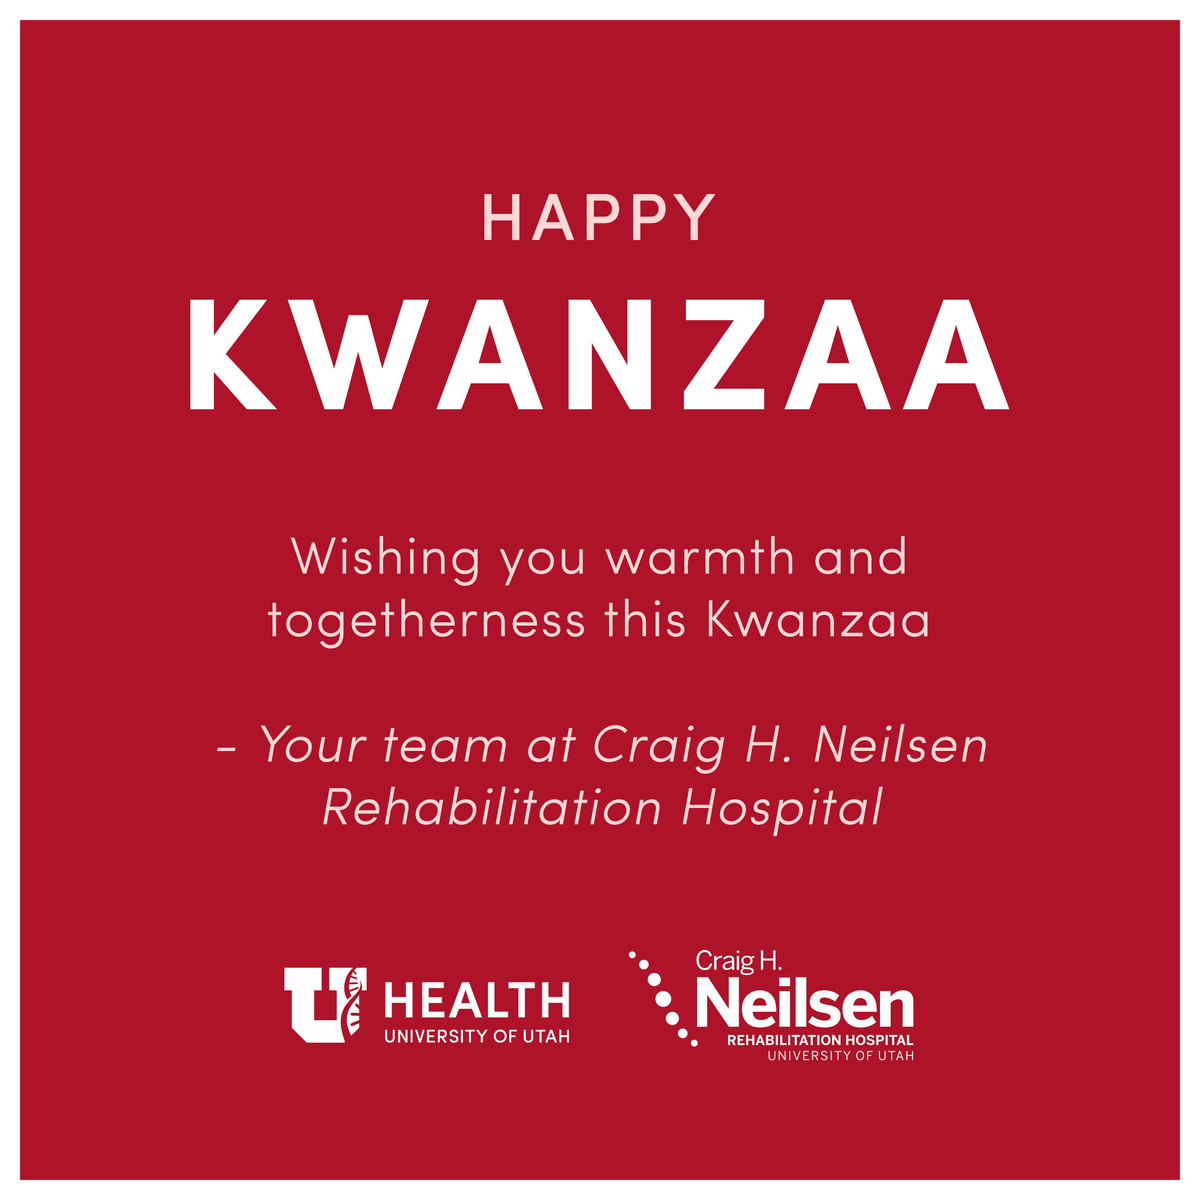 May this week bring you peace and togetherness.
.
.
.
#uofuhealth #uofuhealthcare #reimaginerebuildreinvent #kwanza2022 #peaceandtogetherness #warmthandtogetherness